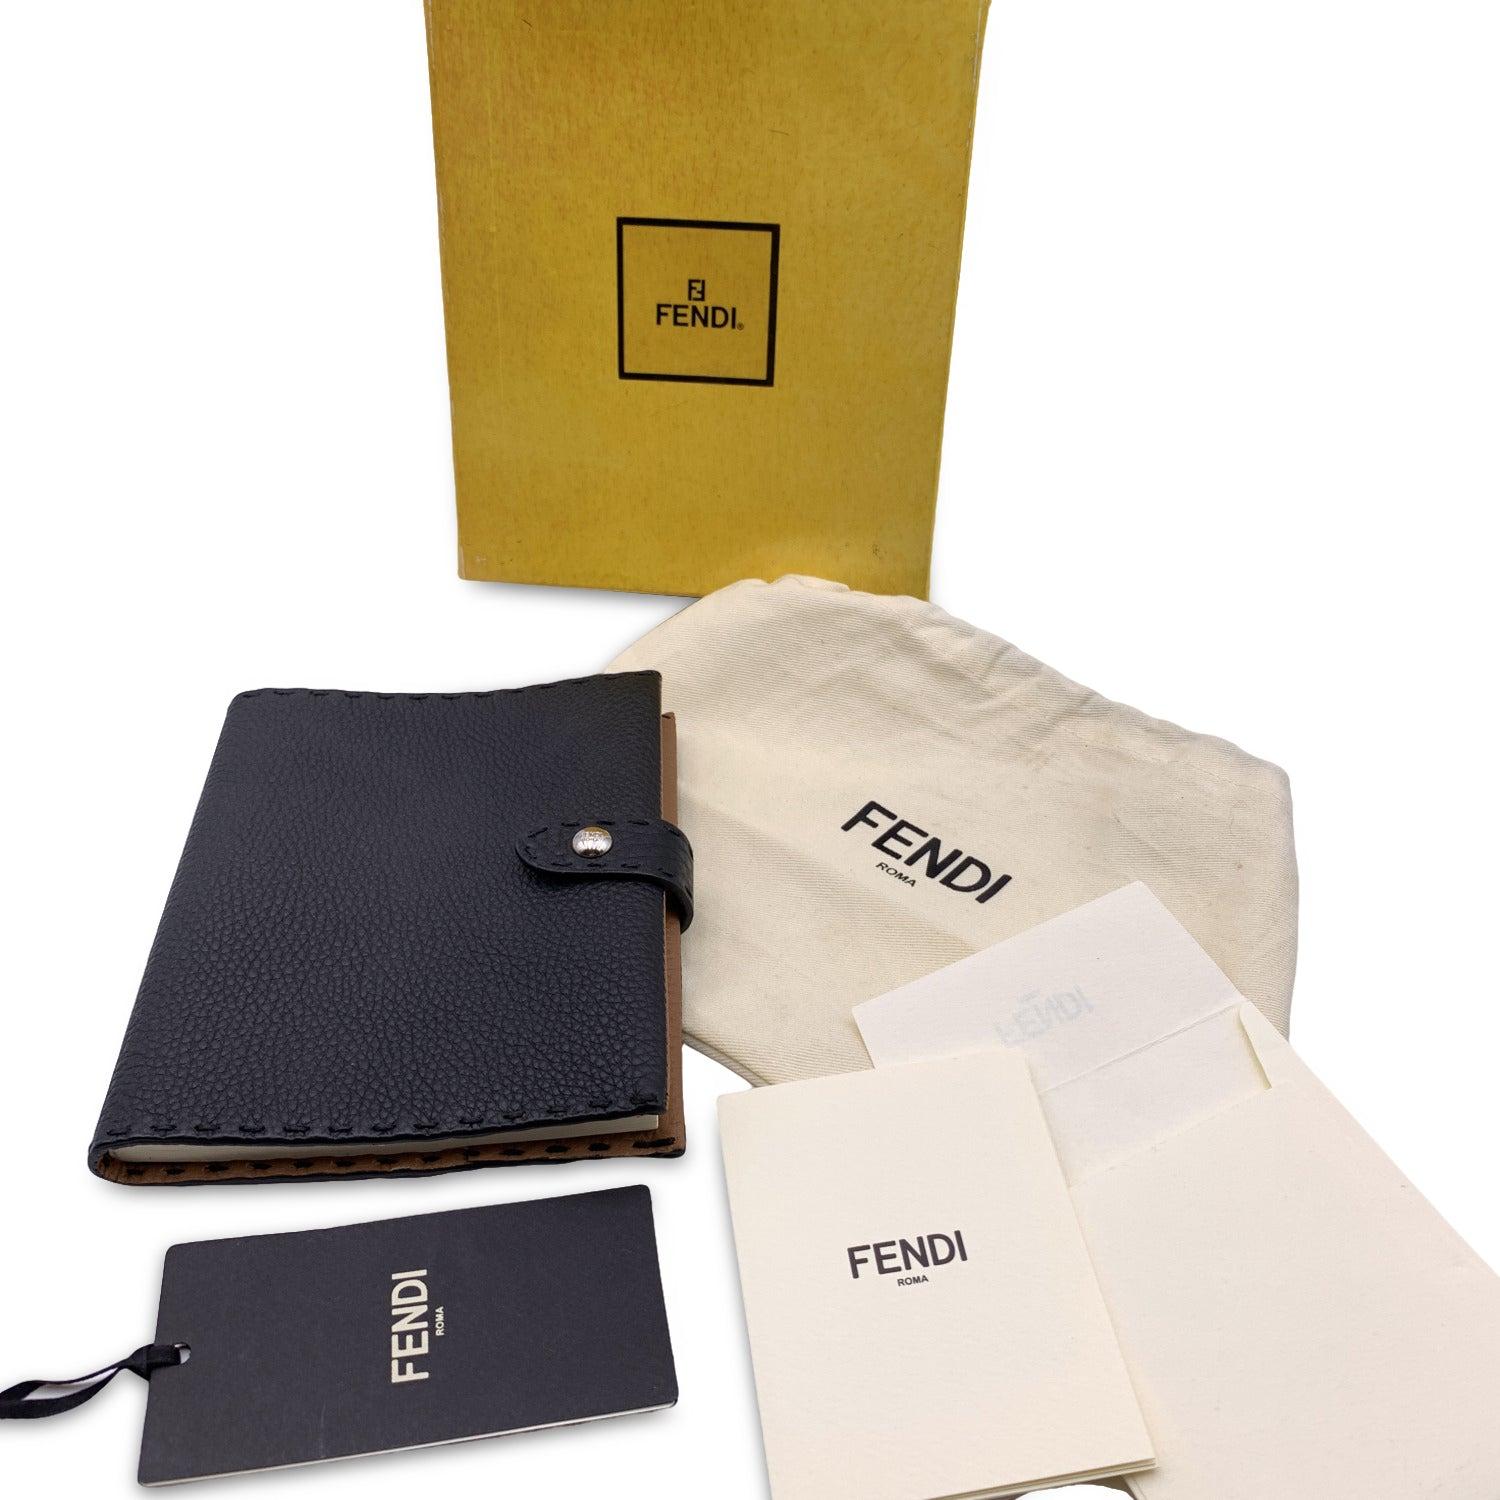 Fendi Selleria Weekly diary in black Roman leather. Beige interior. Rectangular shape with silver button closure. Agenda notebook inside. Measurements: 6.25 x 5.25 inches - 15.7 x 13.2 cm Details MATERIAL: Leather COLOR: Black MODEL: Weekly Small